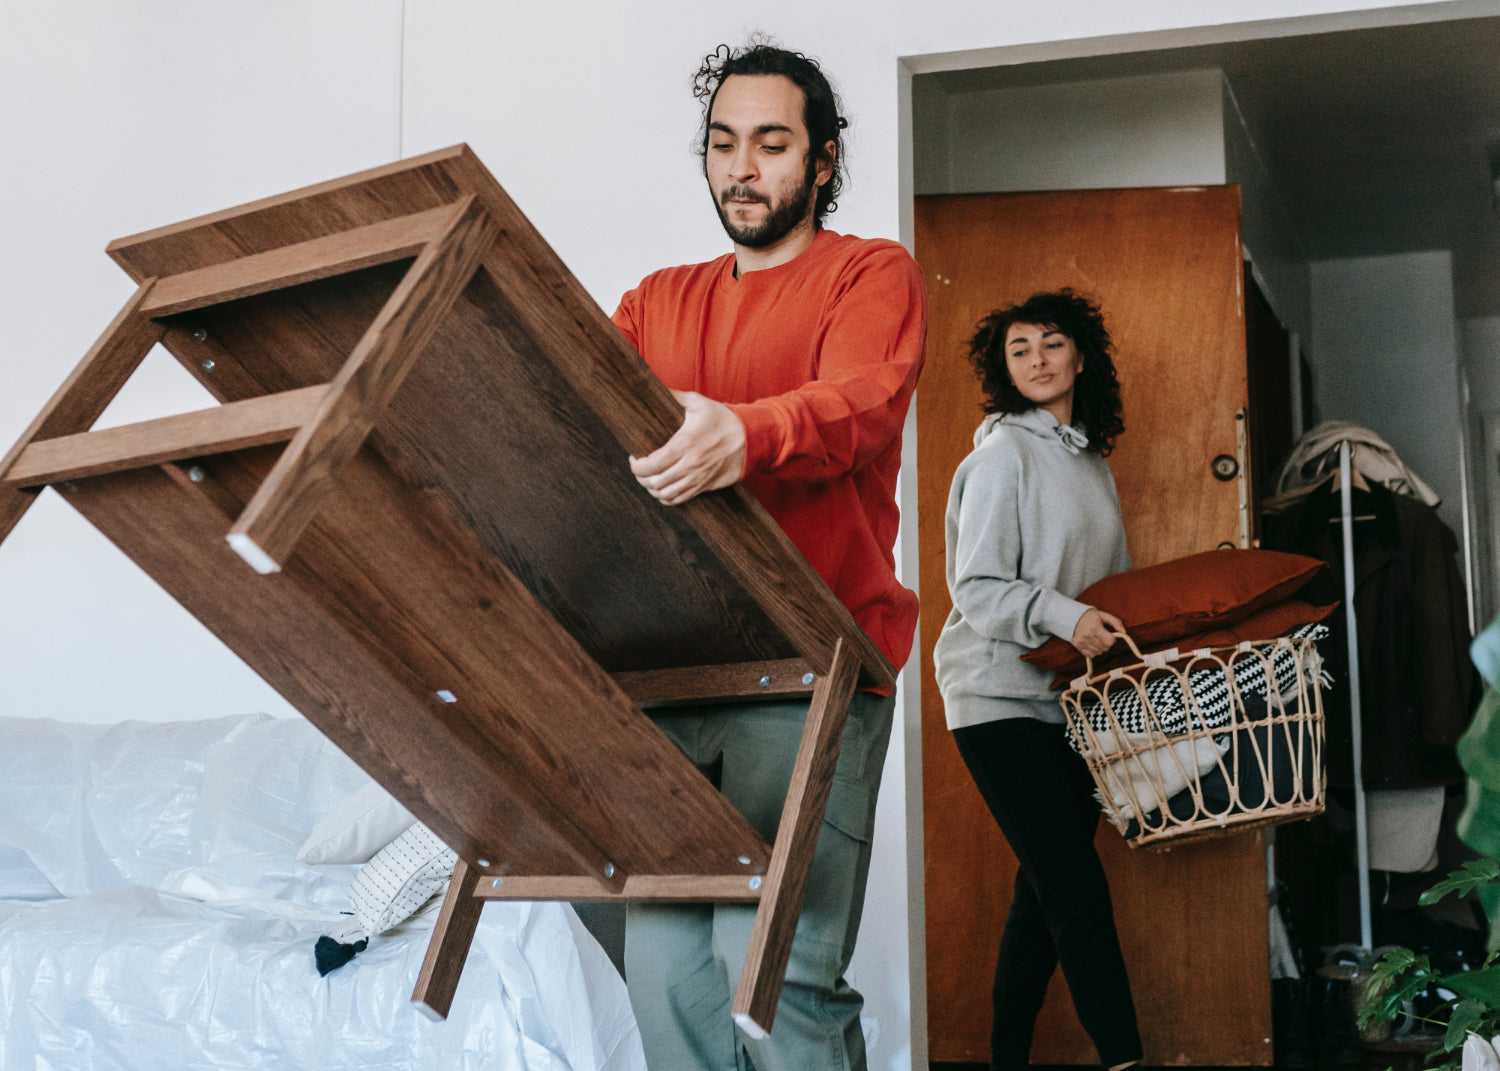 People carry furniture inside an apartment